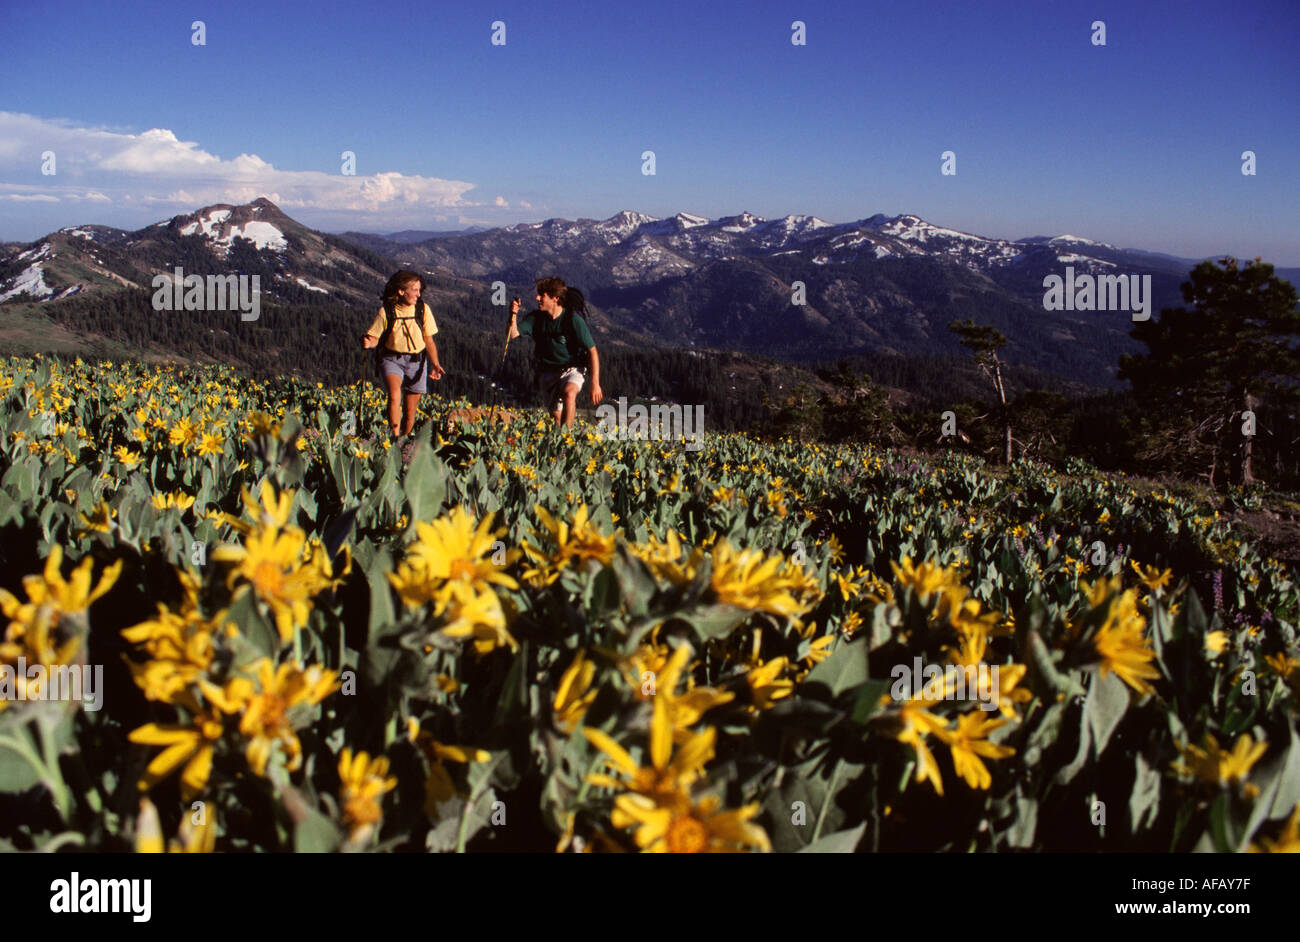 A couple hiking through a field of yellow flowers on Mt Lincoln near Truckee CA Stock Photo